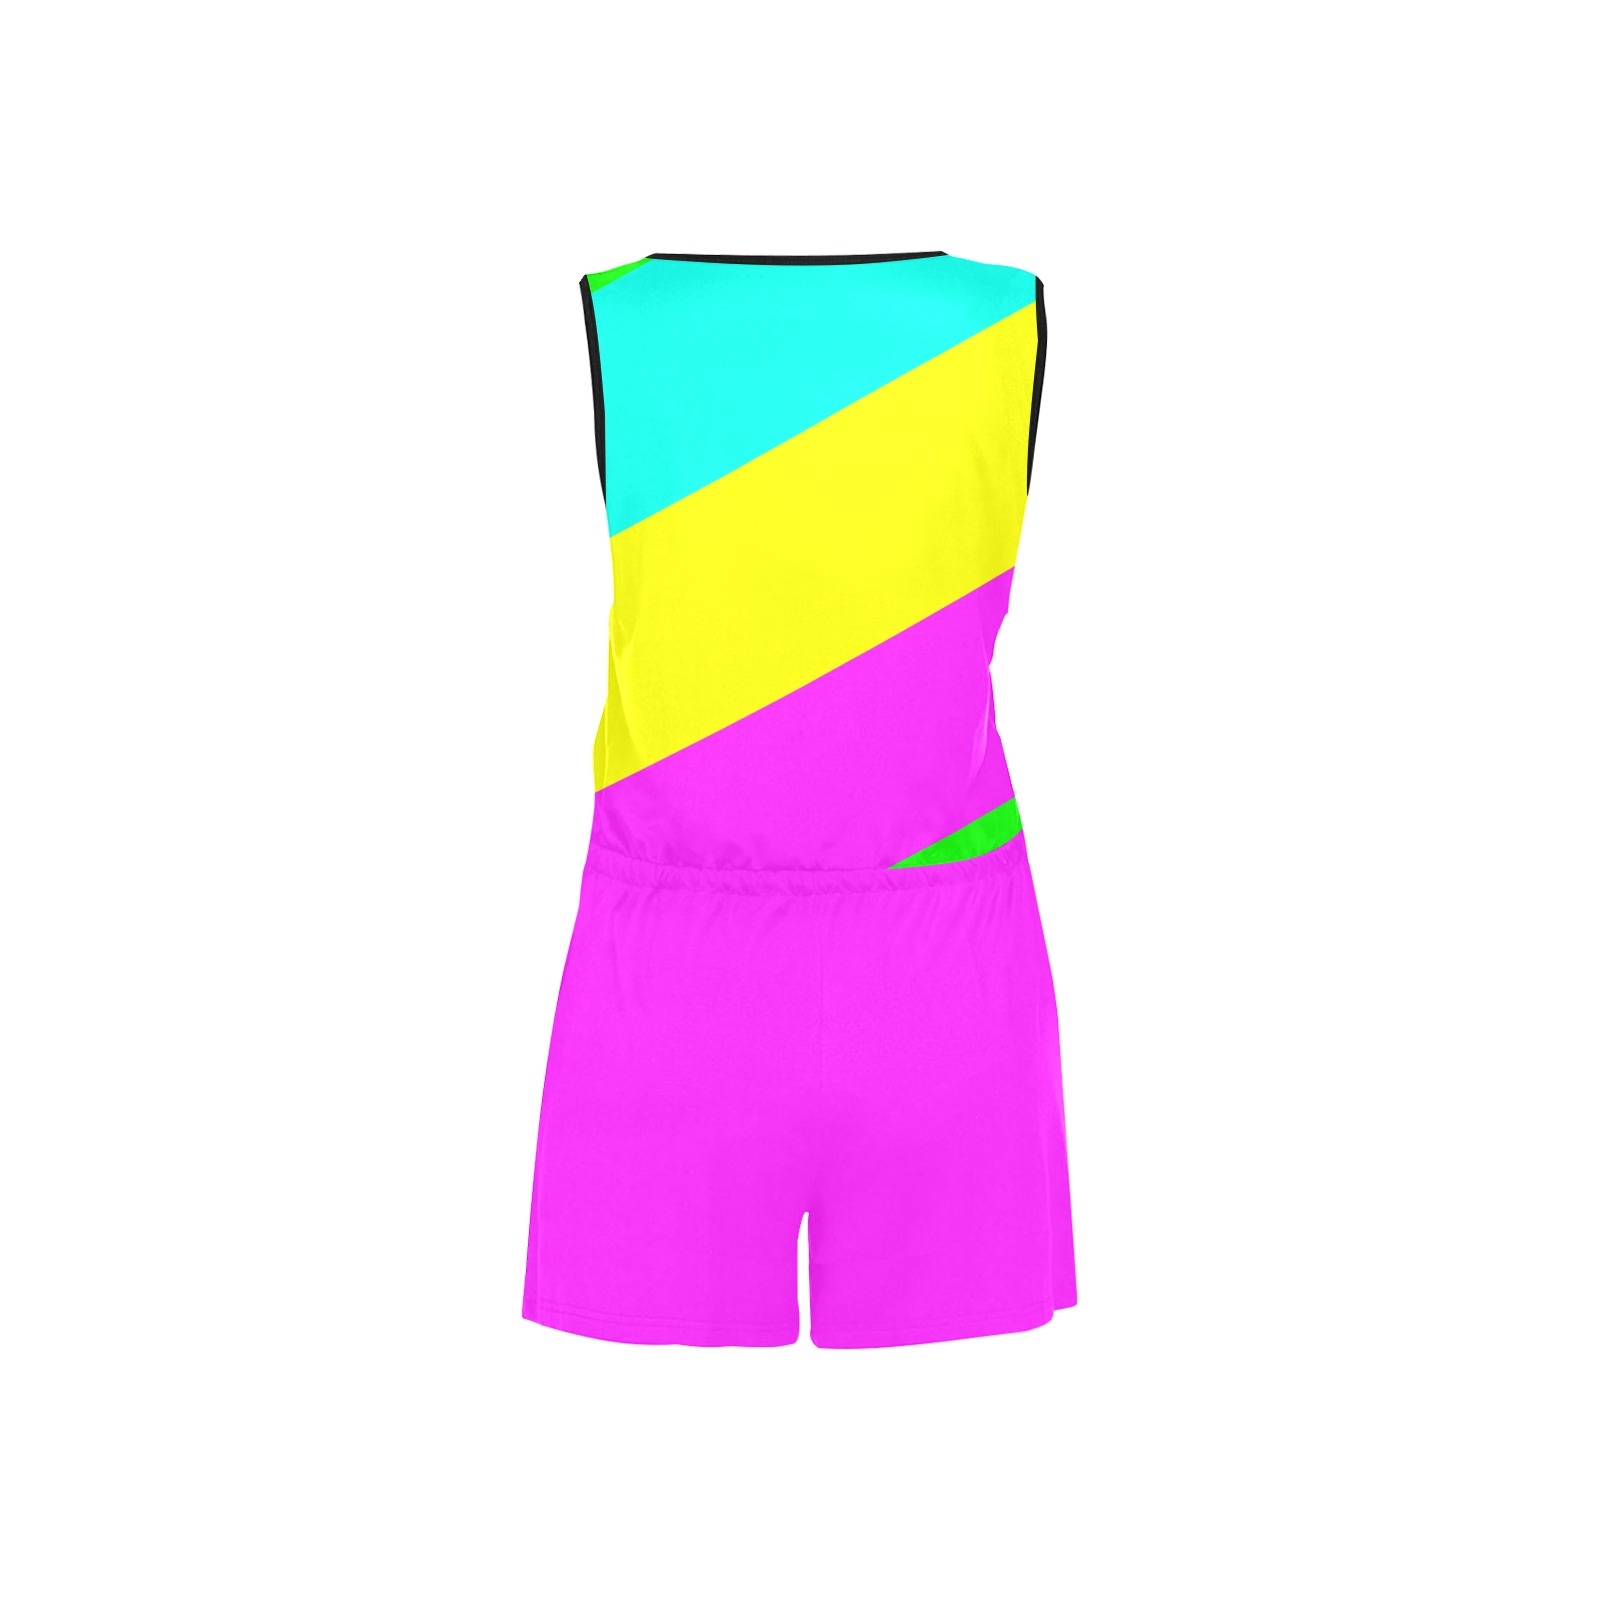 Bright Neon Colors Diagonal Pink All Over Print Short Jumpsuit